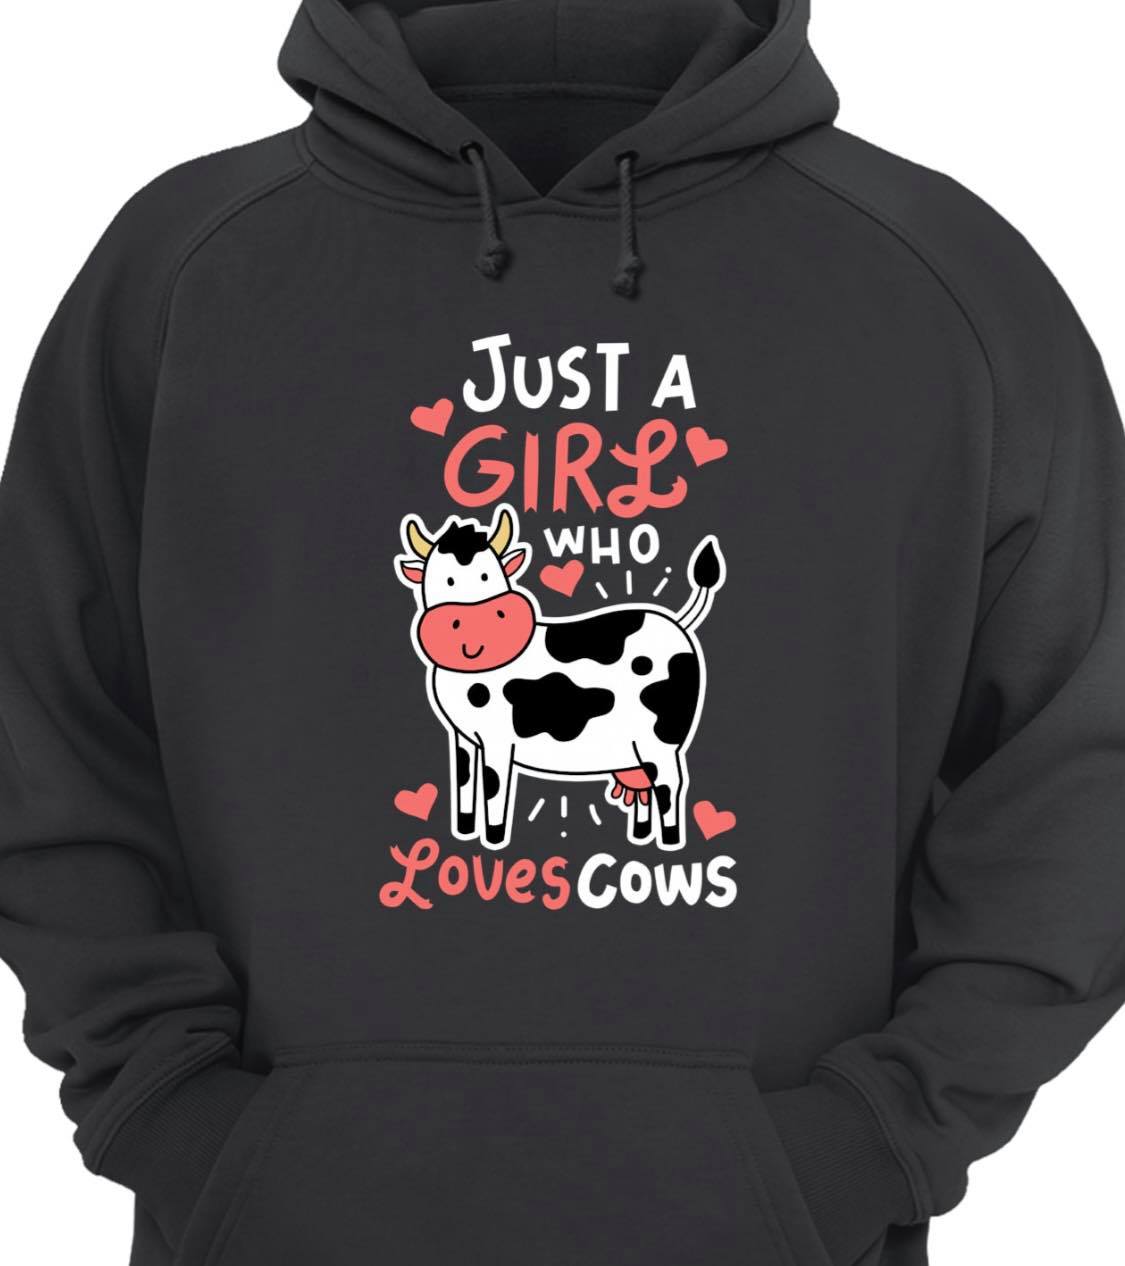 Just a girl who loves cows - Grumpy cow milk